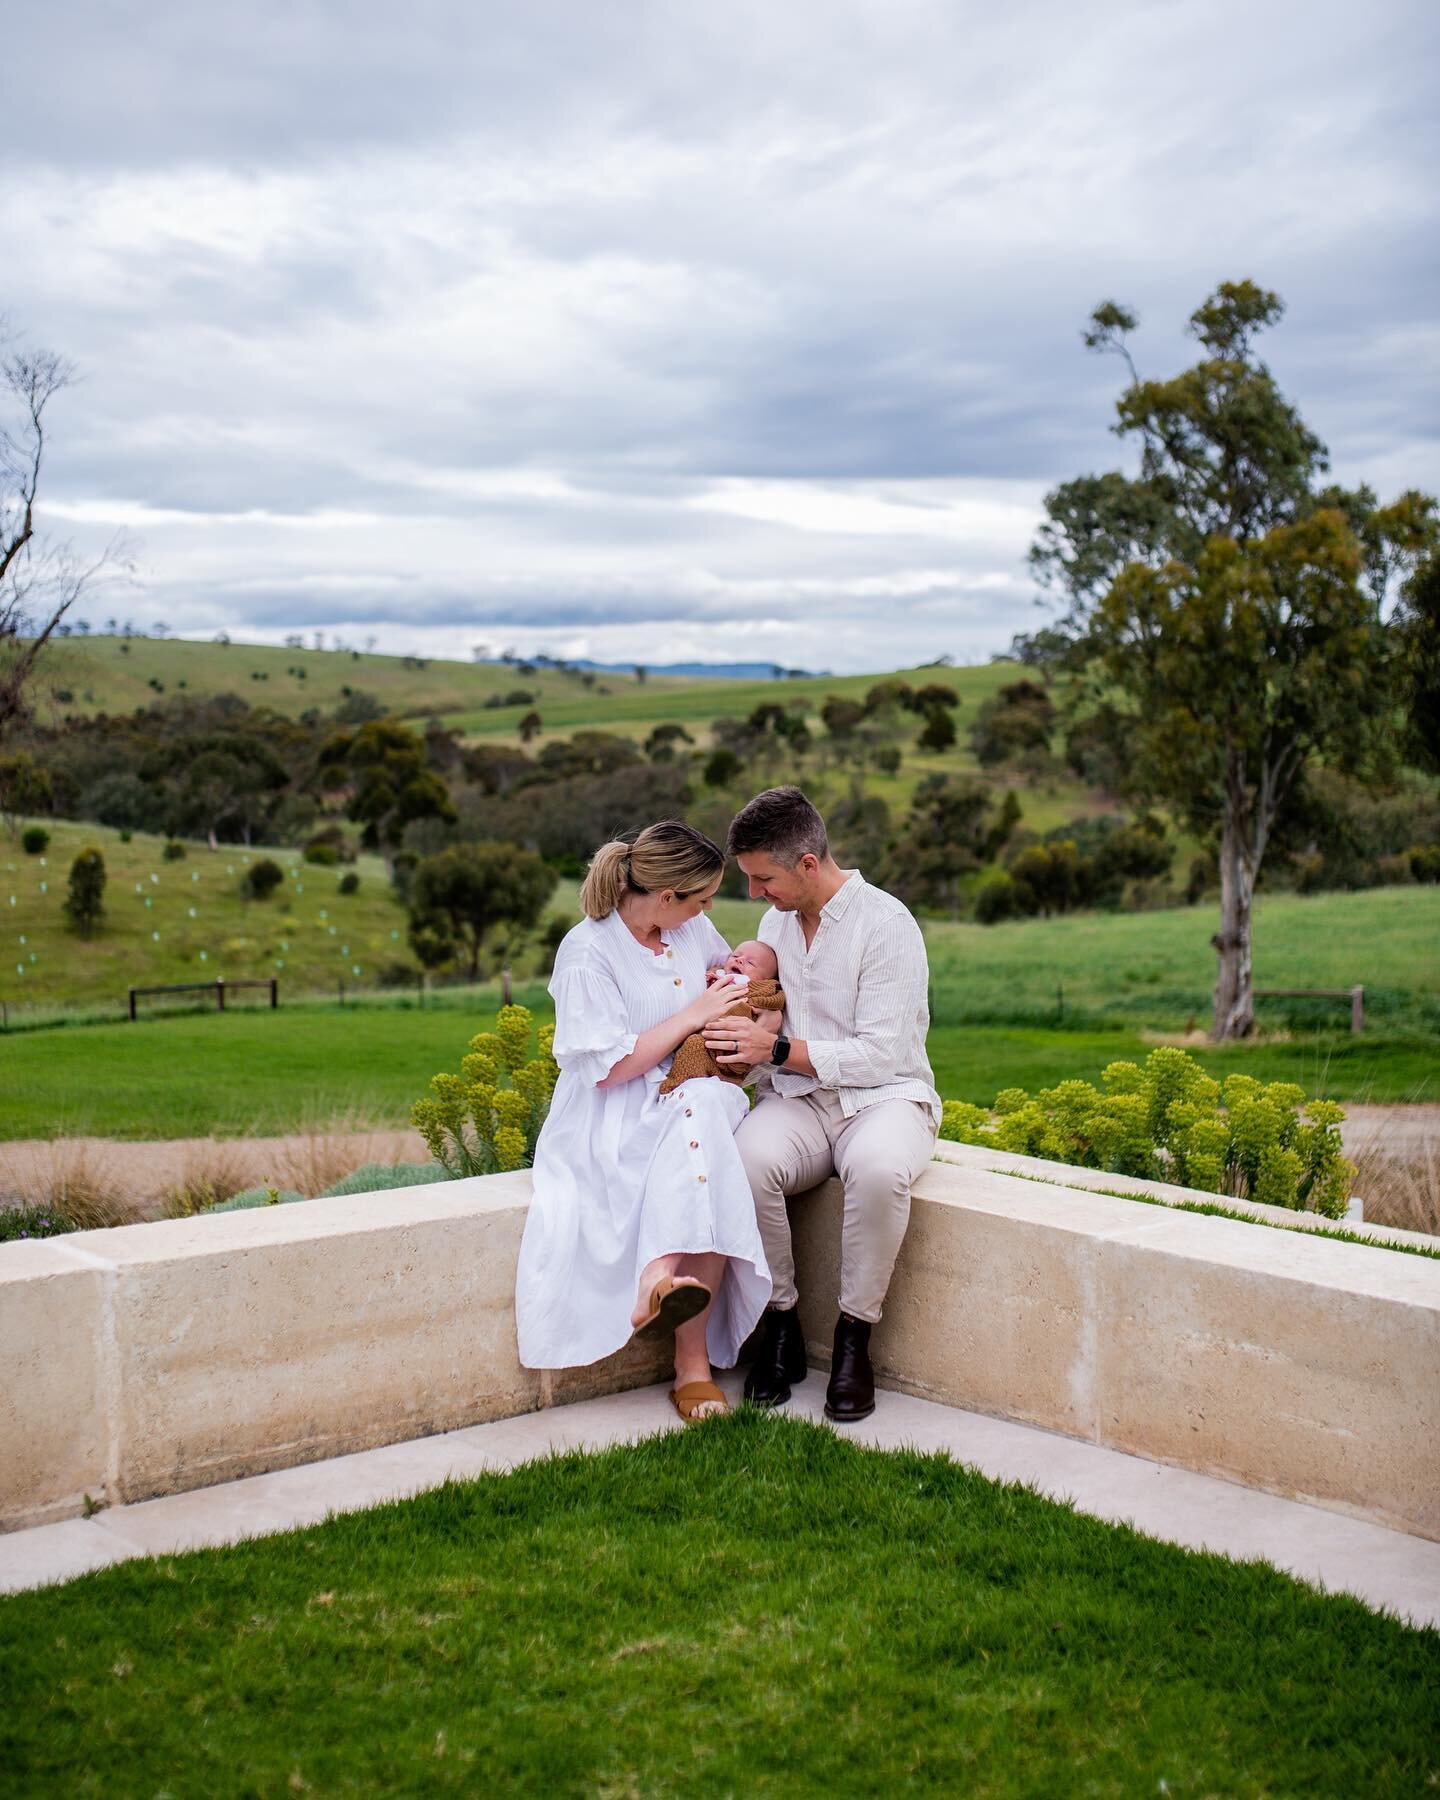 South Australia has some of the most gorgeous places for Family Photos! I can work with you to find the perfect spot!

#safamilyphotographer #familyphotography #photography #barossafamilyphotography #barossafamilyphotographer #newborn #lifestyle #onl